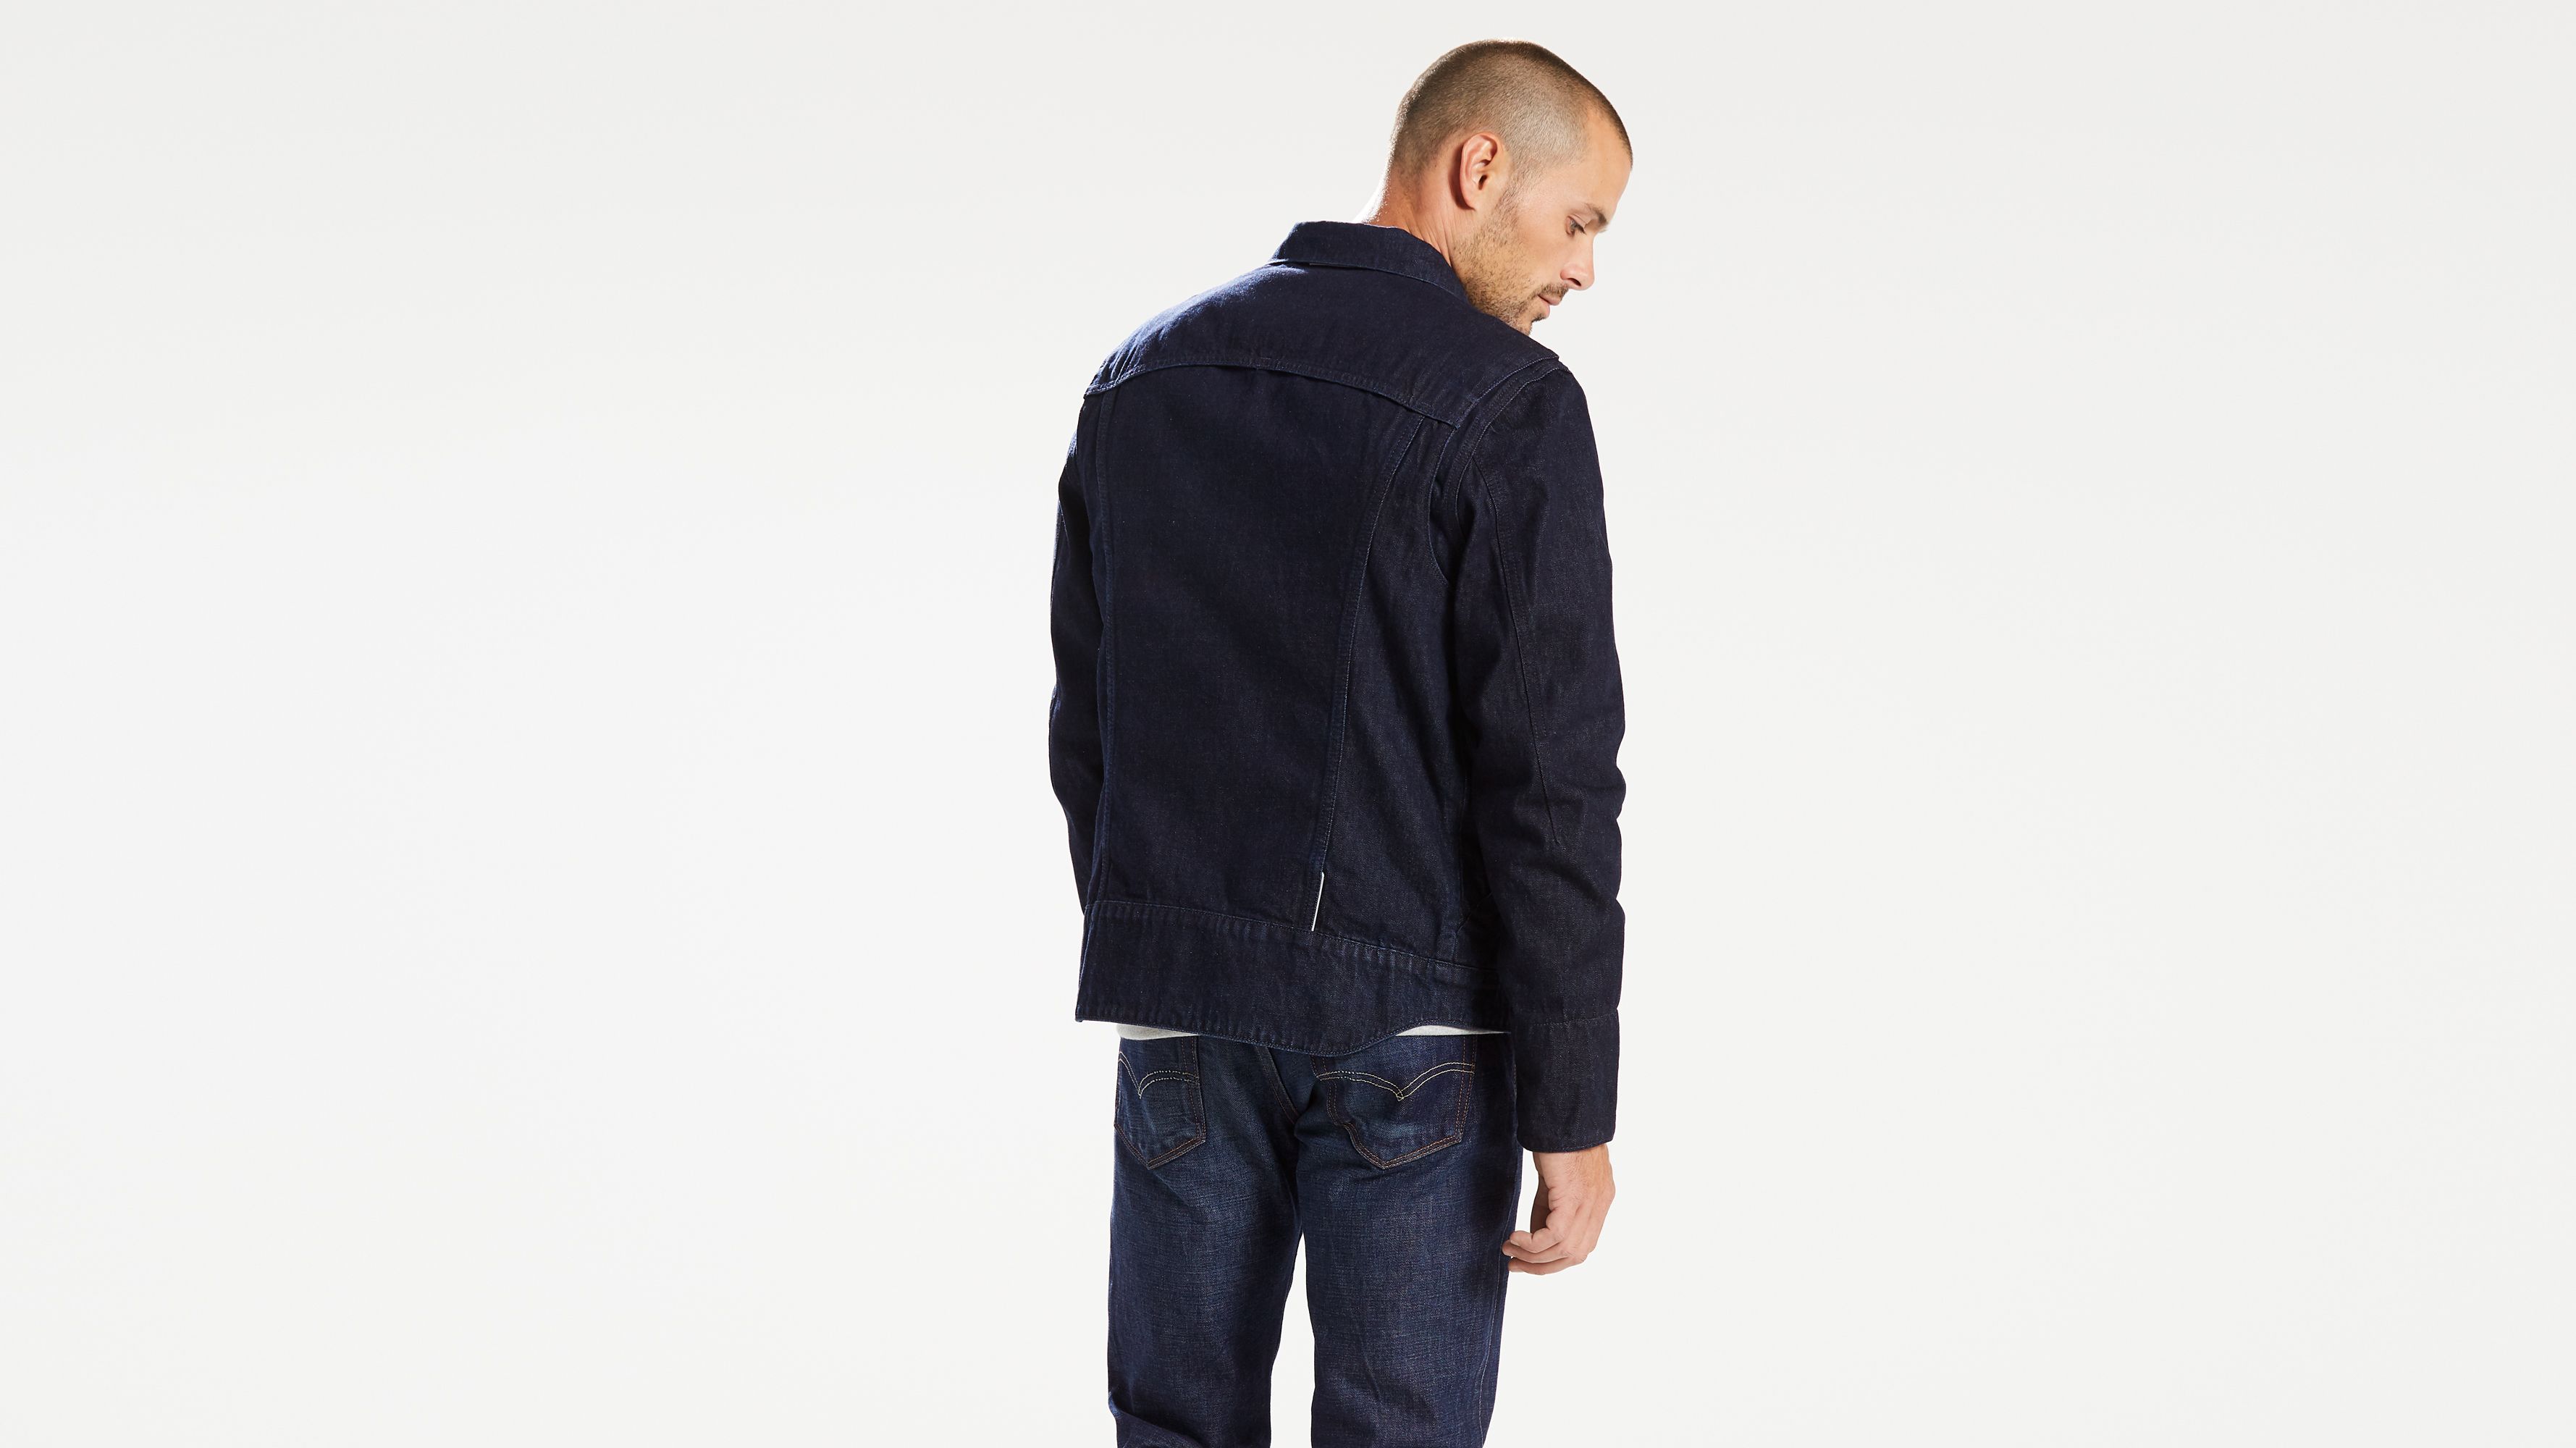 Washing and Wearing Google and Levi's Smart Commuter Jacket - Men's Journal